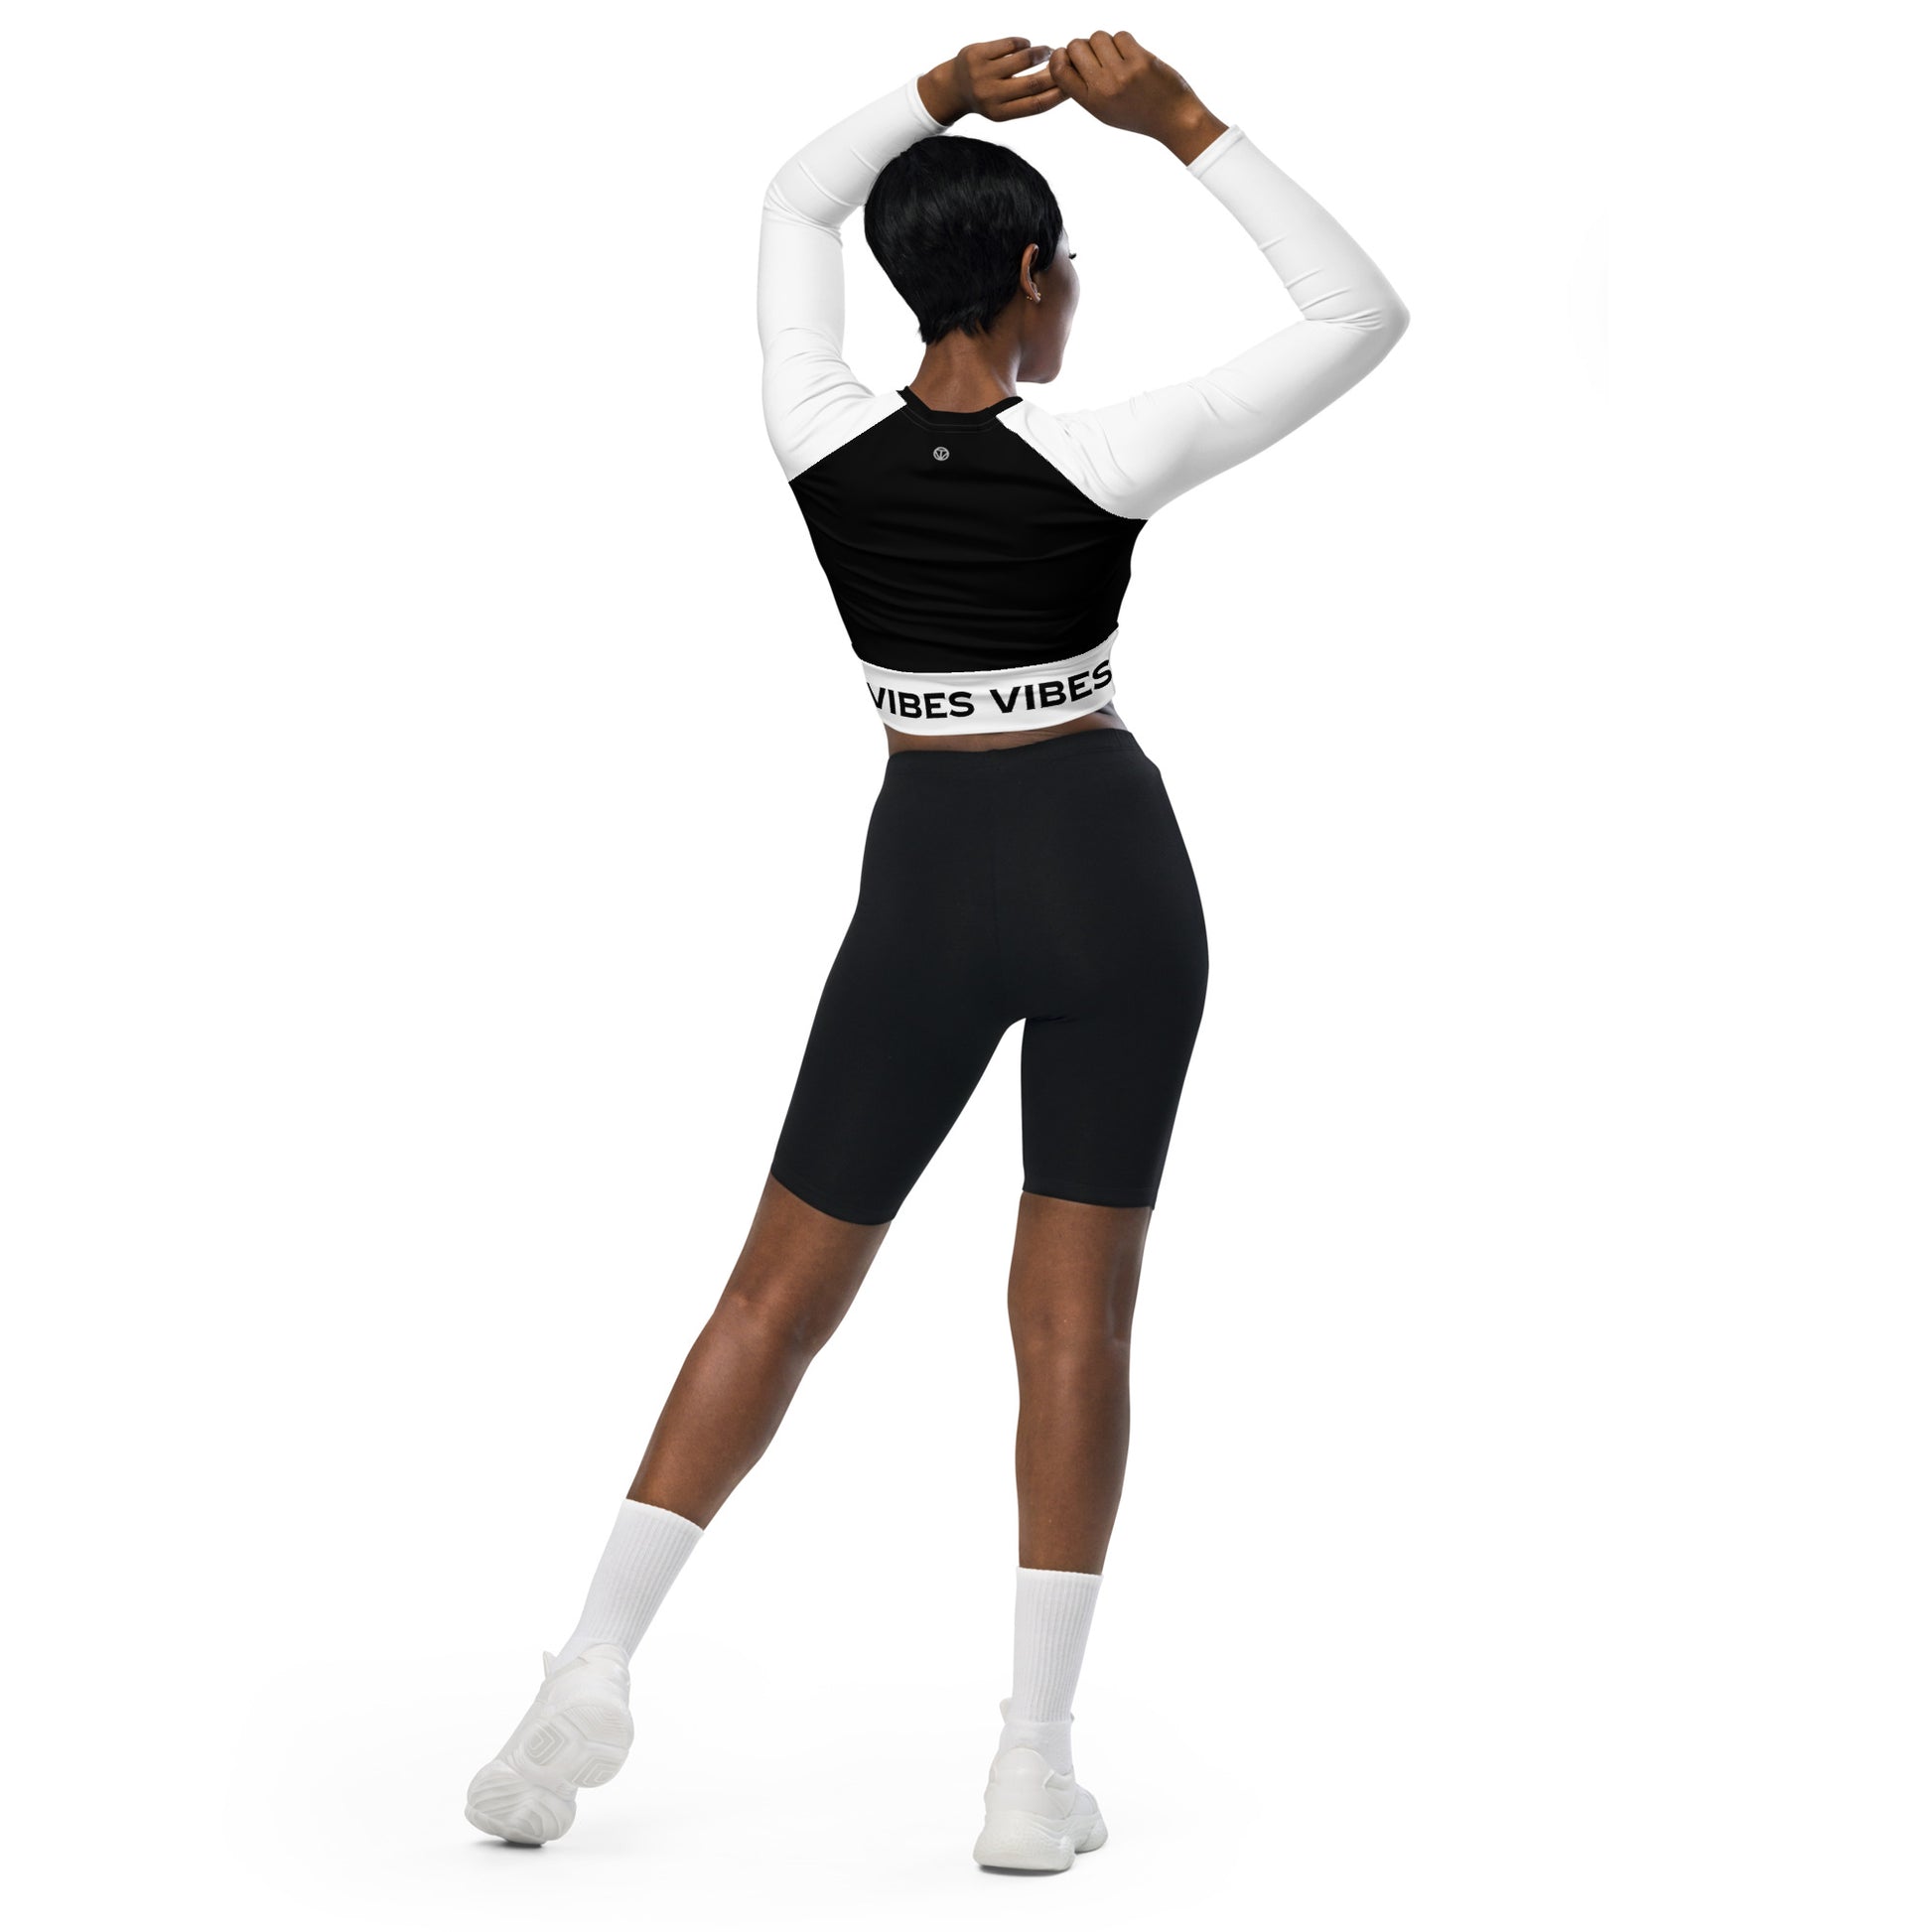 TIME OF VIBES - Recycled long-sleeve crop top VIBES (Black/White) - €54.00